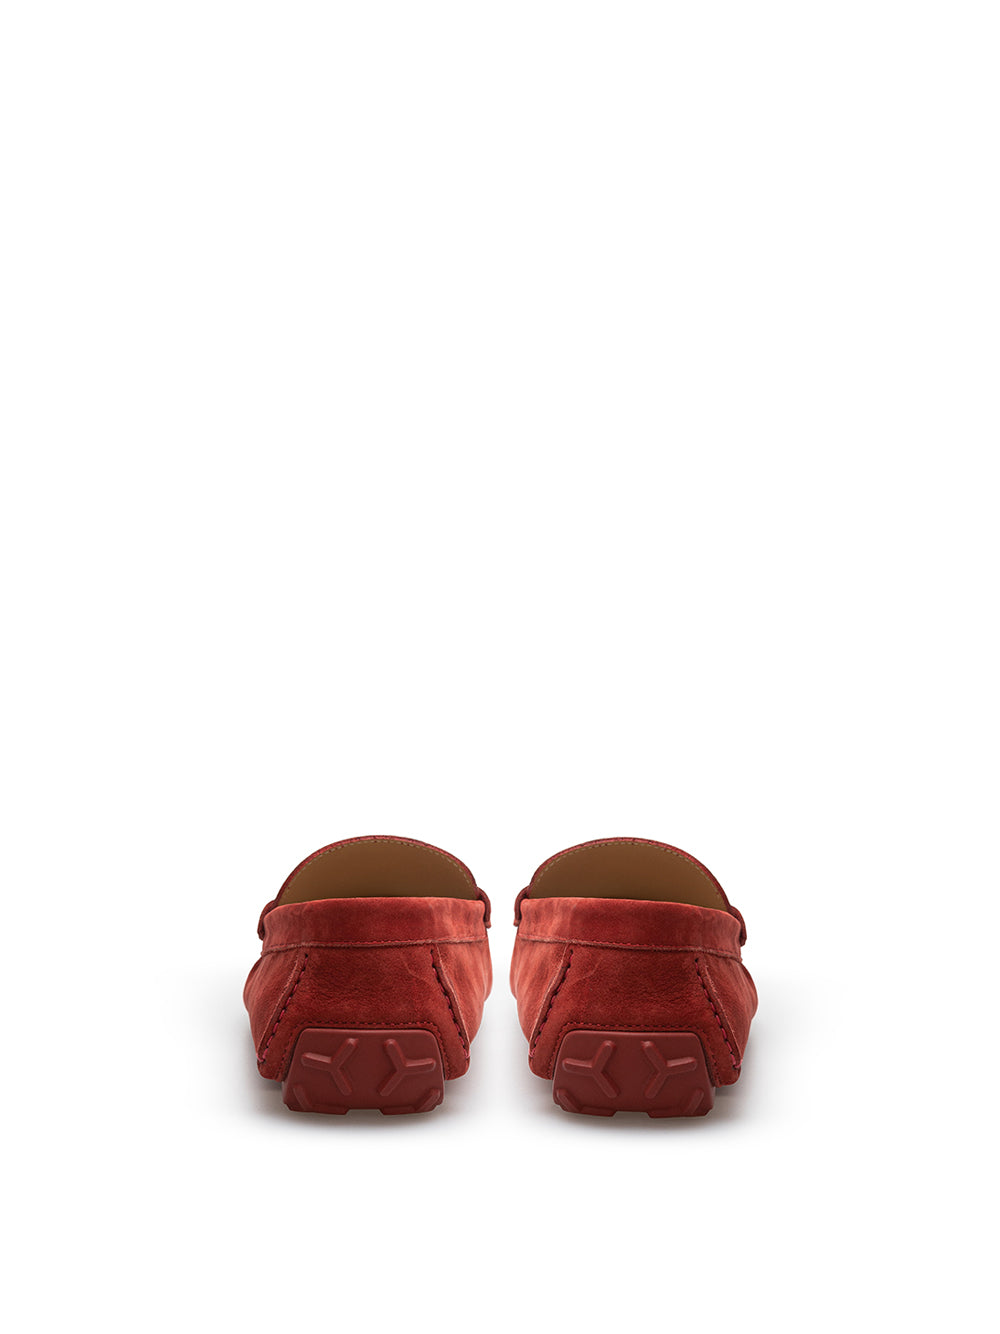 Bordeaux penny moccasin in Bally suede